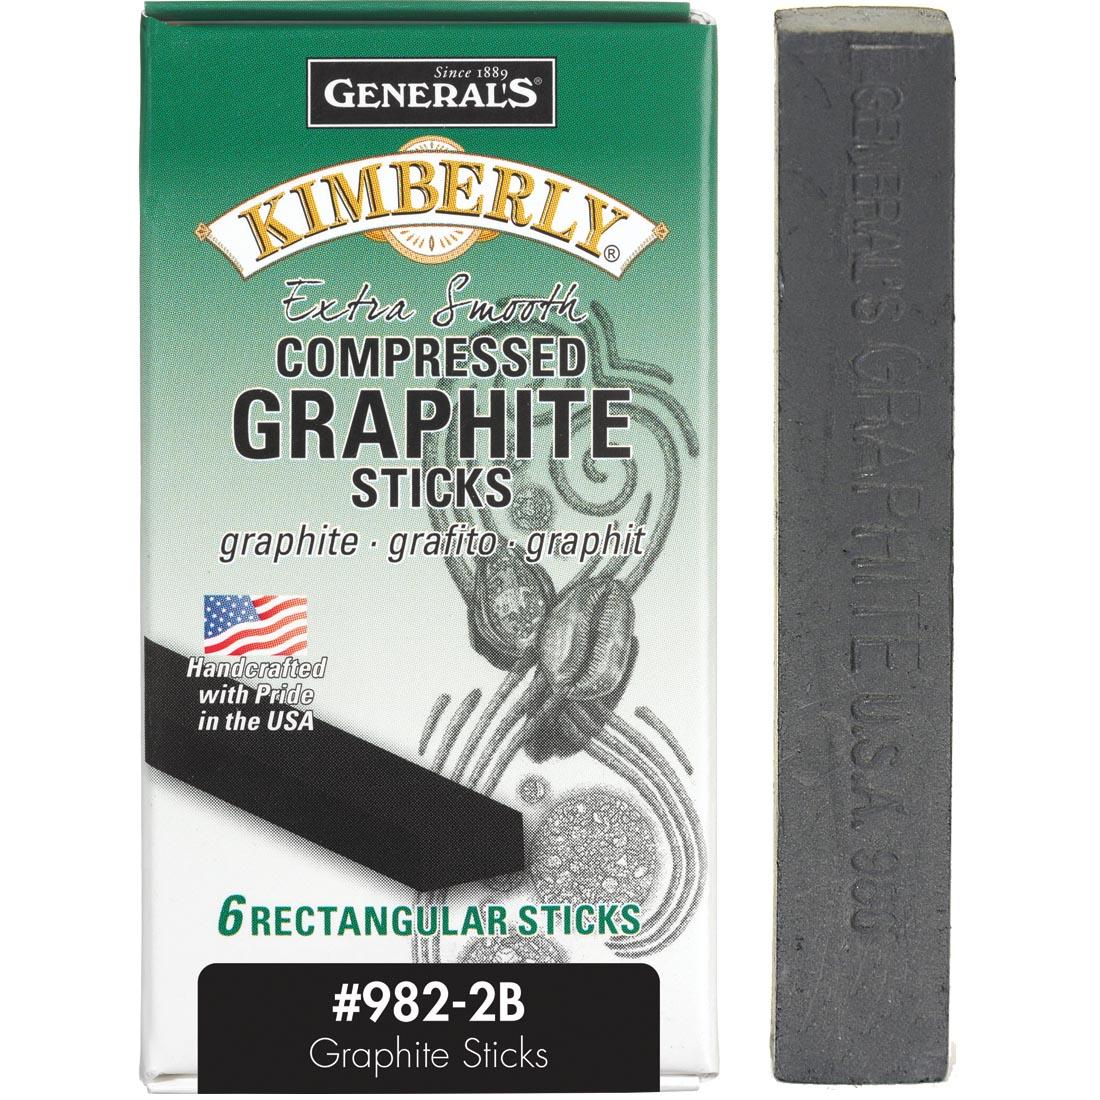 General's Kimberly Compressed Graphite Sticks 2B 6-Count Package with a single one shown outside the box